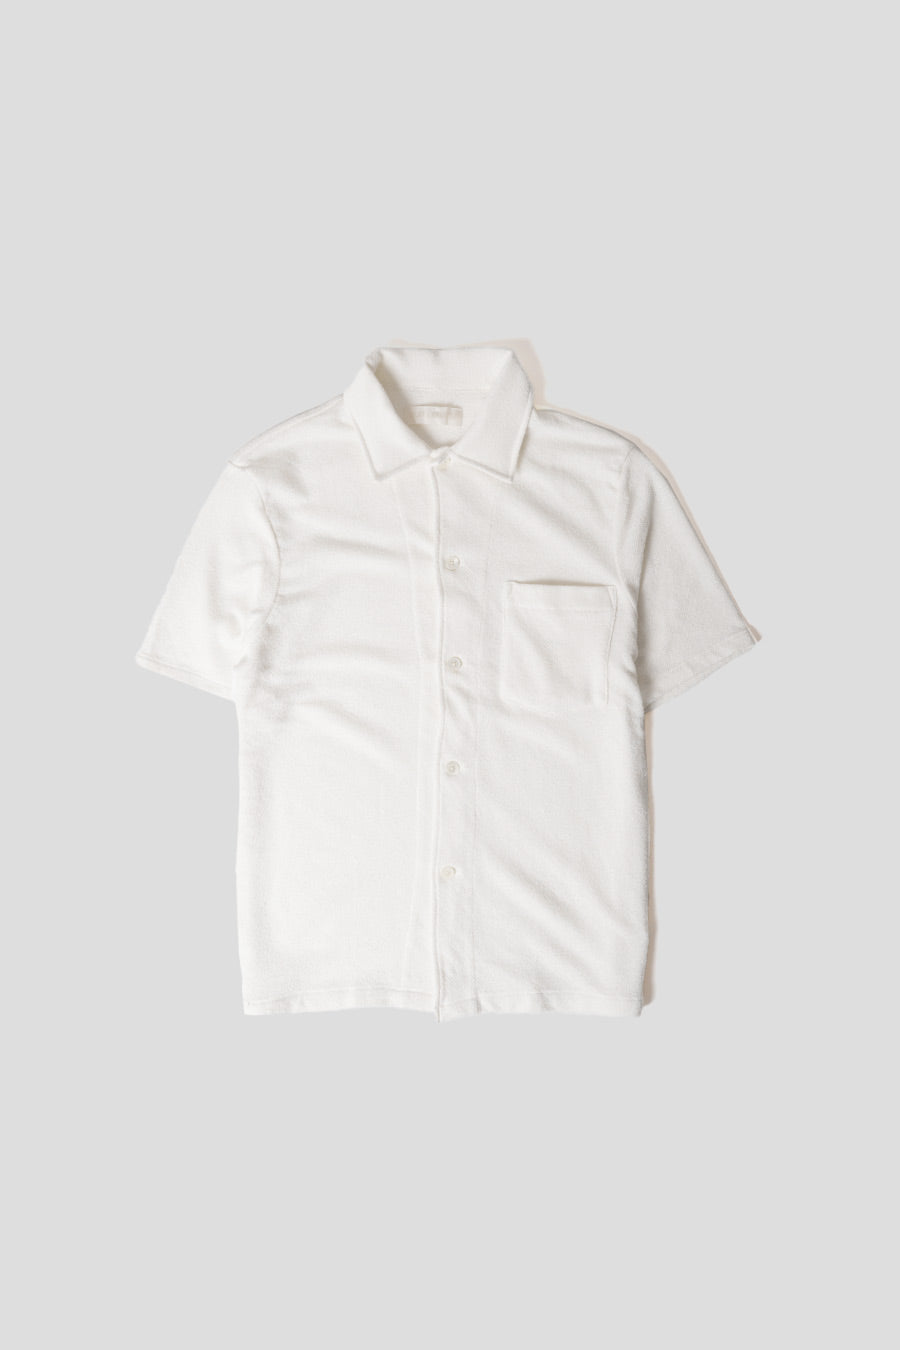 Our Legacy - SHORT-SLEEVED WHITE SHIRT - LE LABO STORE